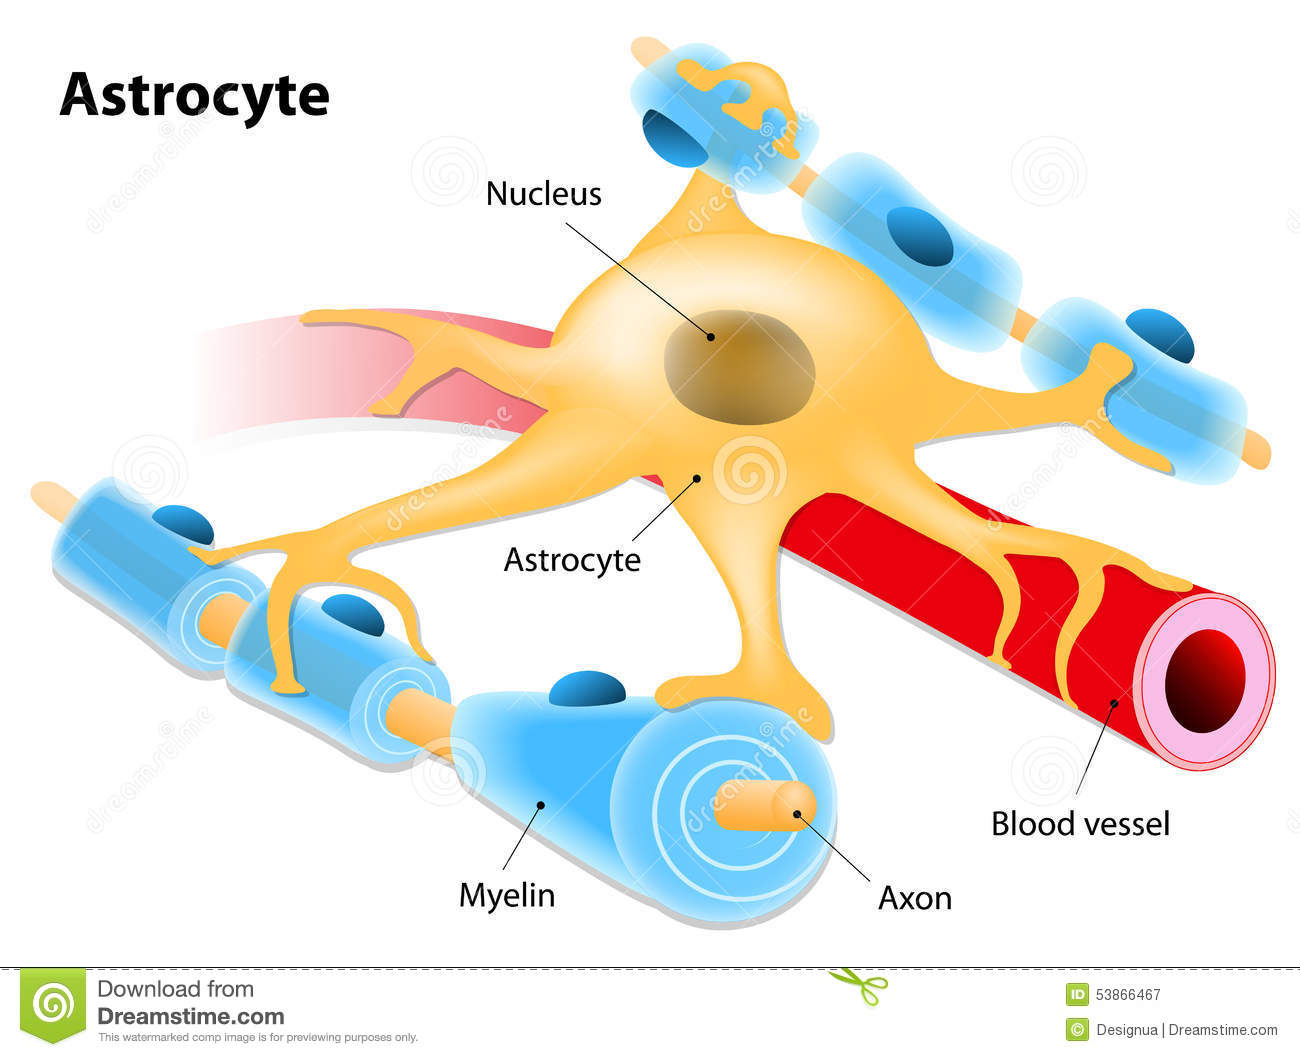 Astrocyte cells